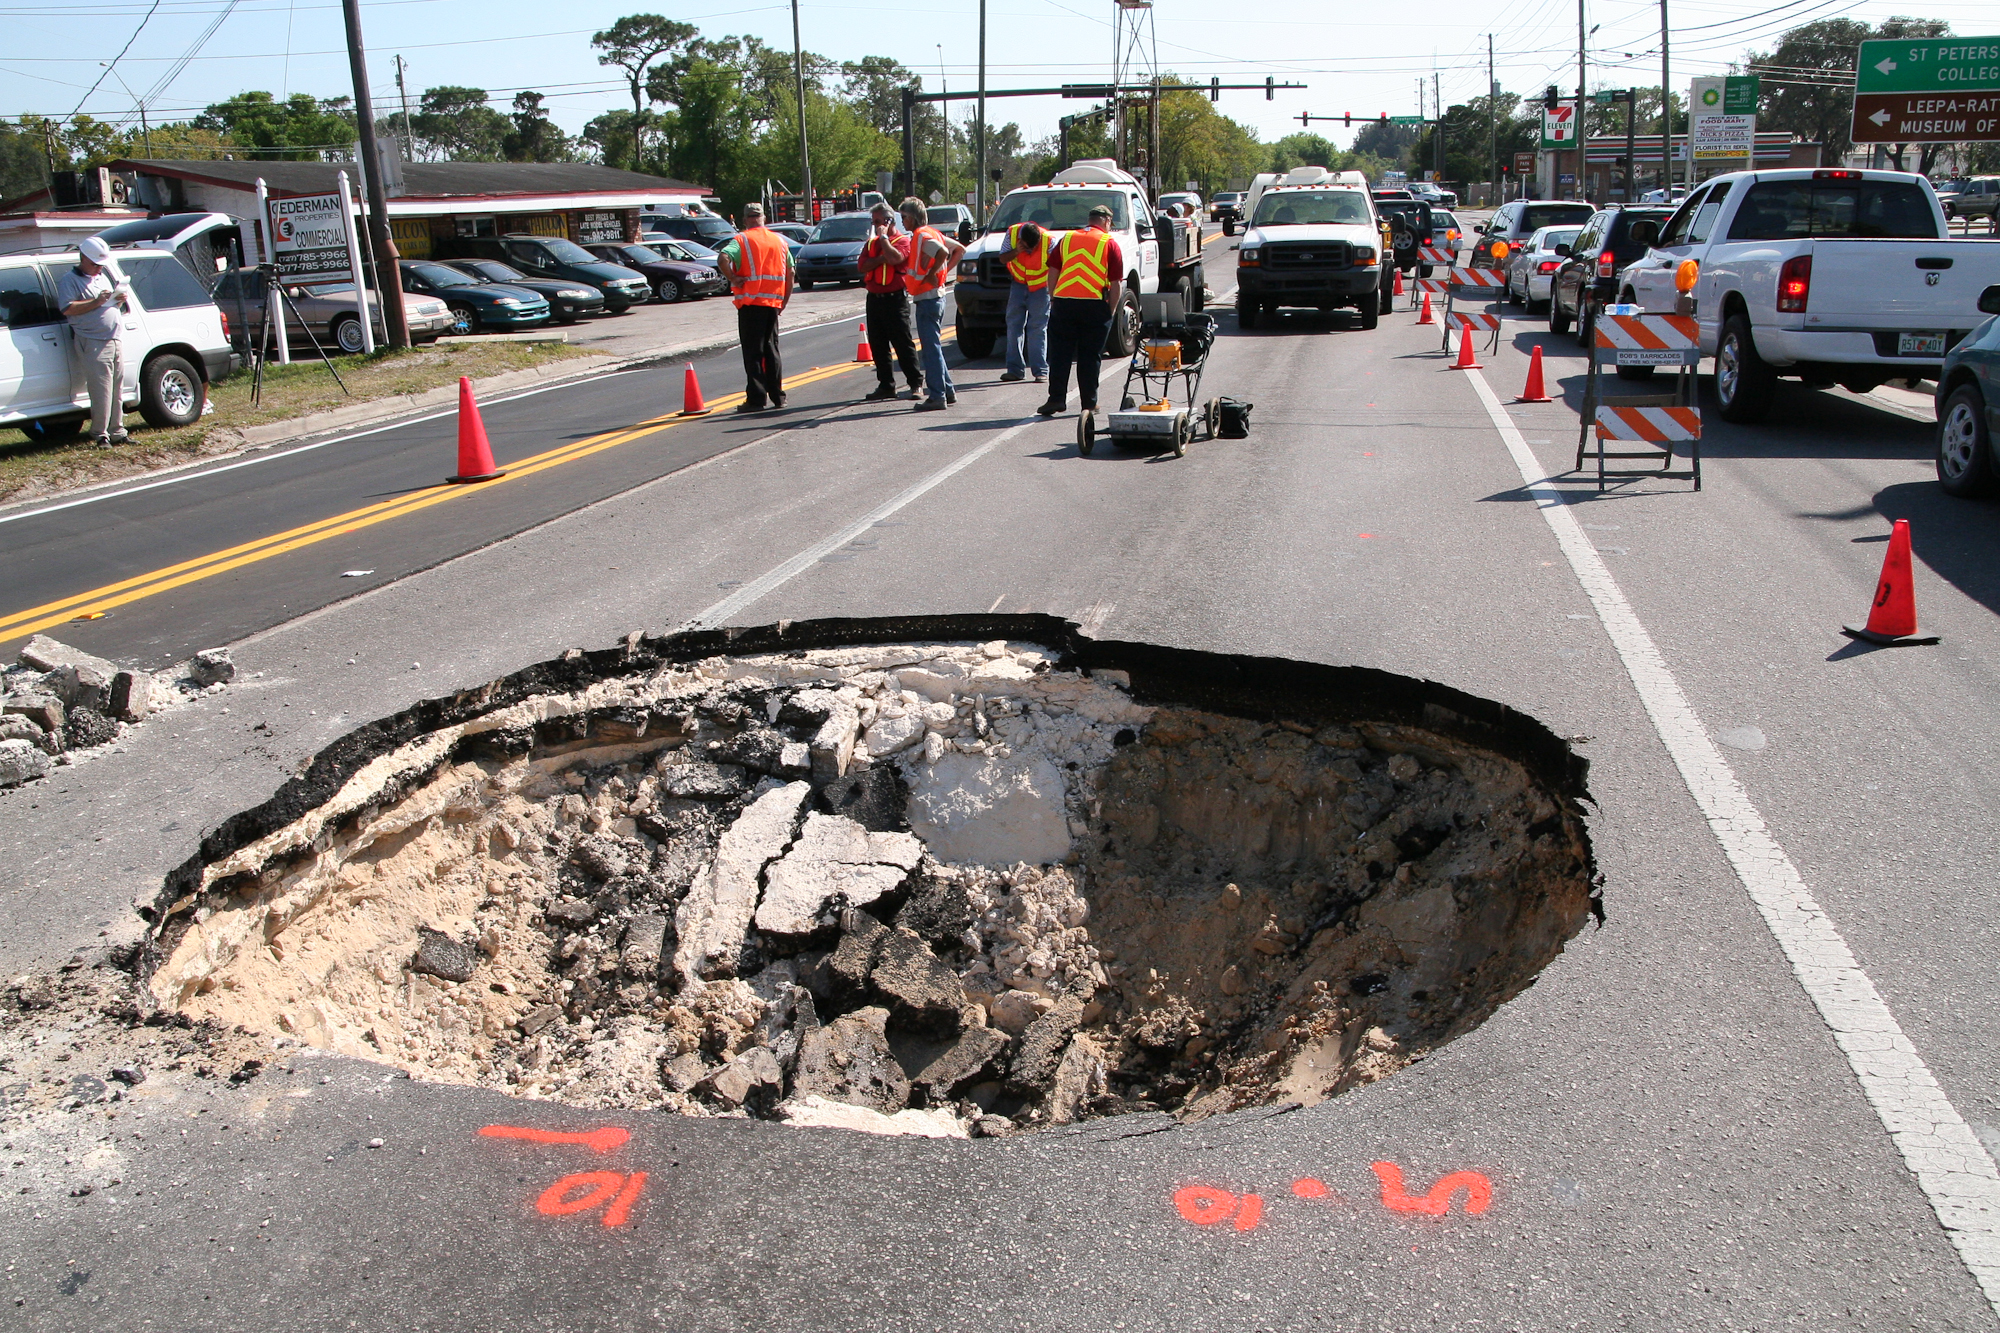 GPR survey by a sinkhole beneath a road in Pinellas County, Florida